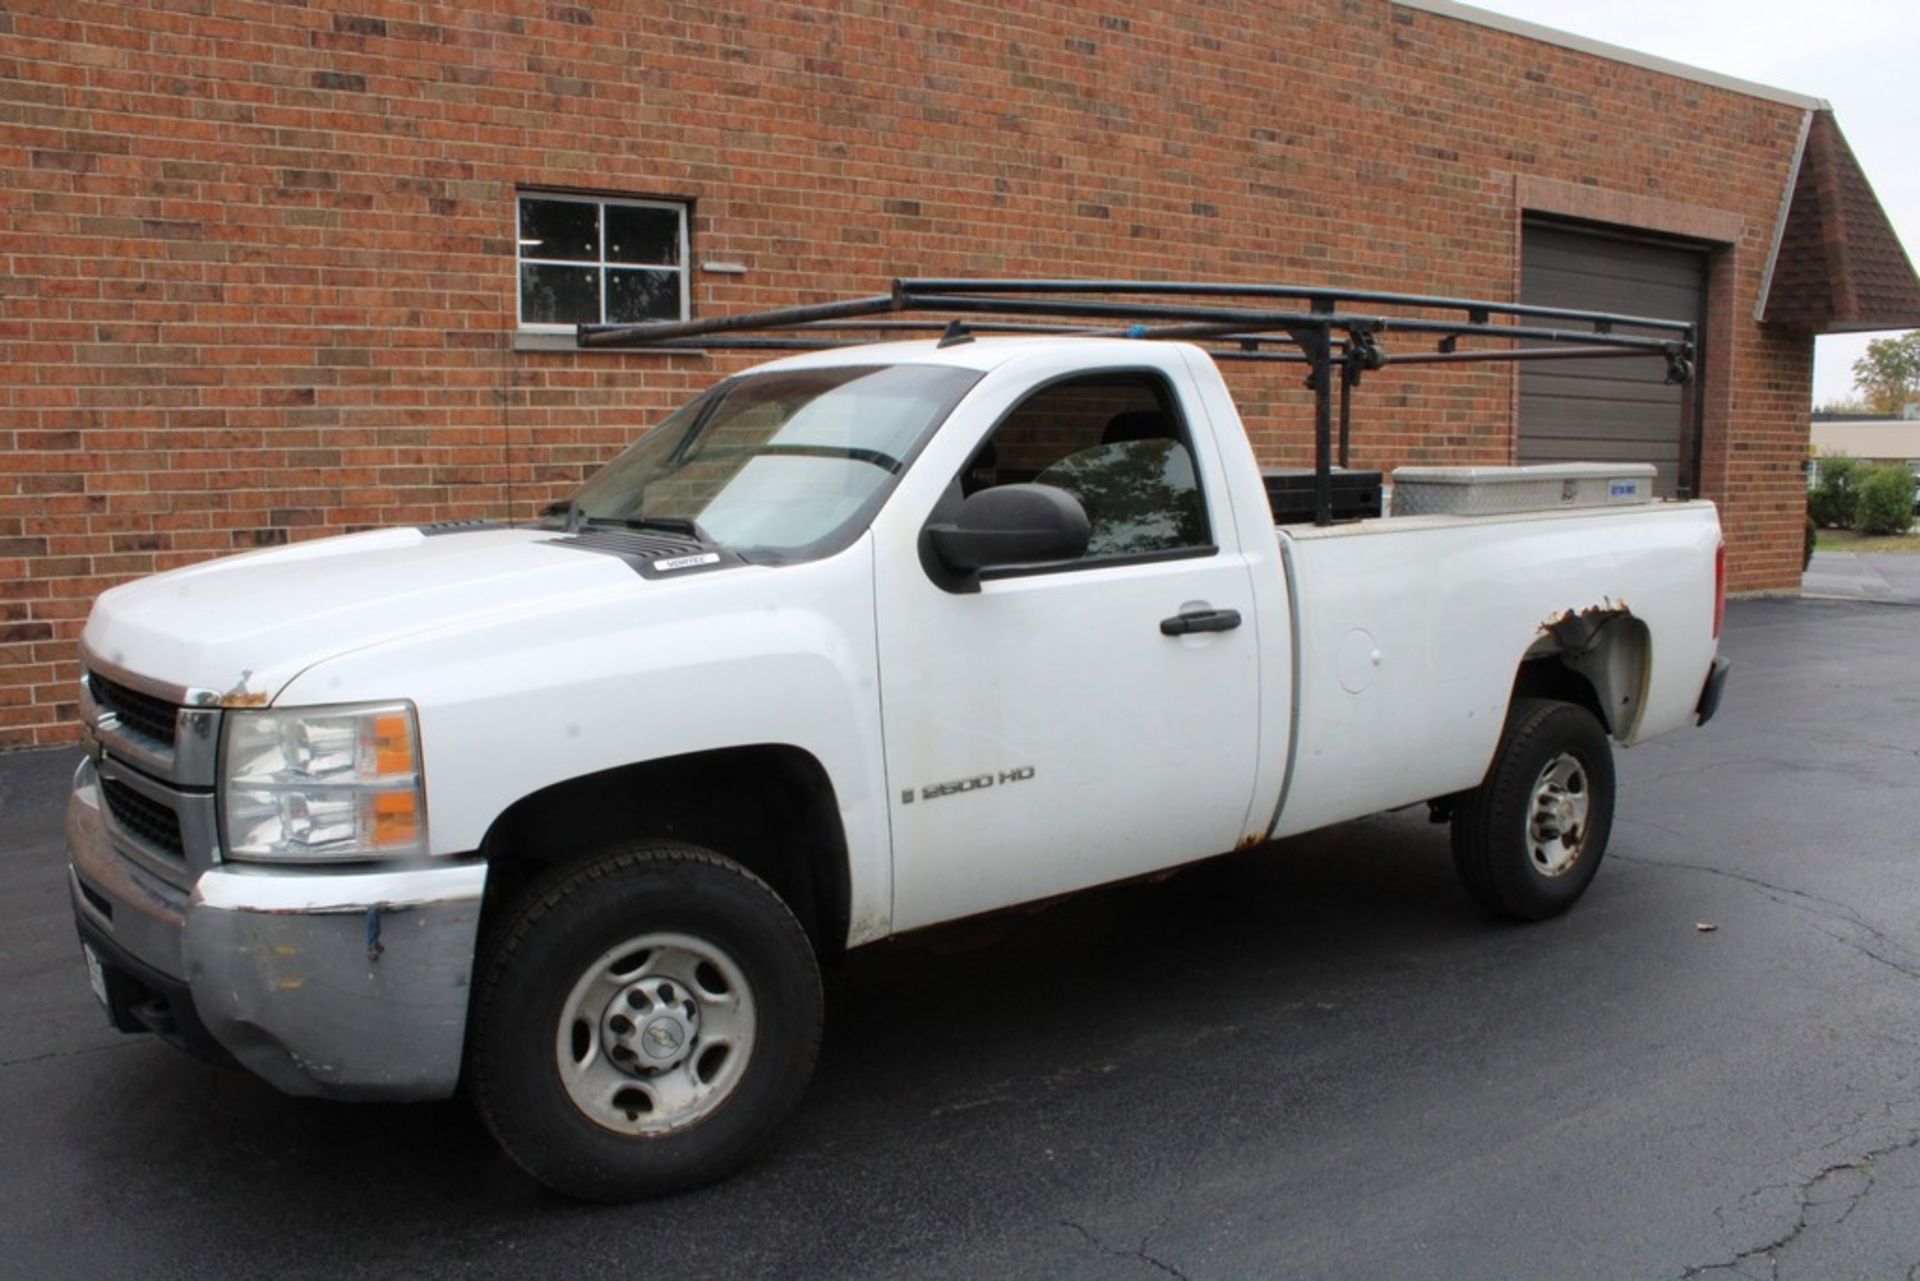 2007 CHEVROLET 2500HD STANDARD CAB PICKUP TRUCK, WITH LADDER RACK, DIAMOND PLATE TOOL BOX AND JOB - Image 2 of 10